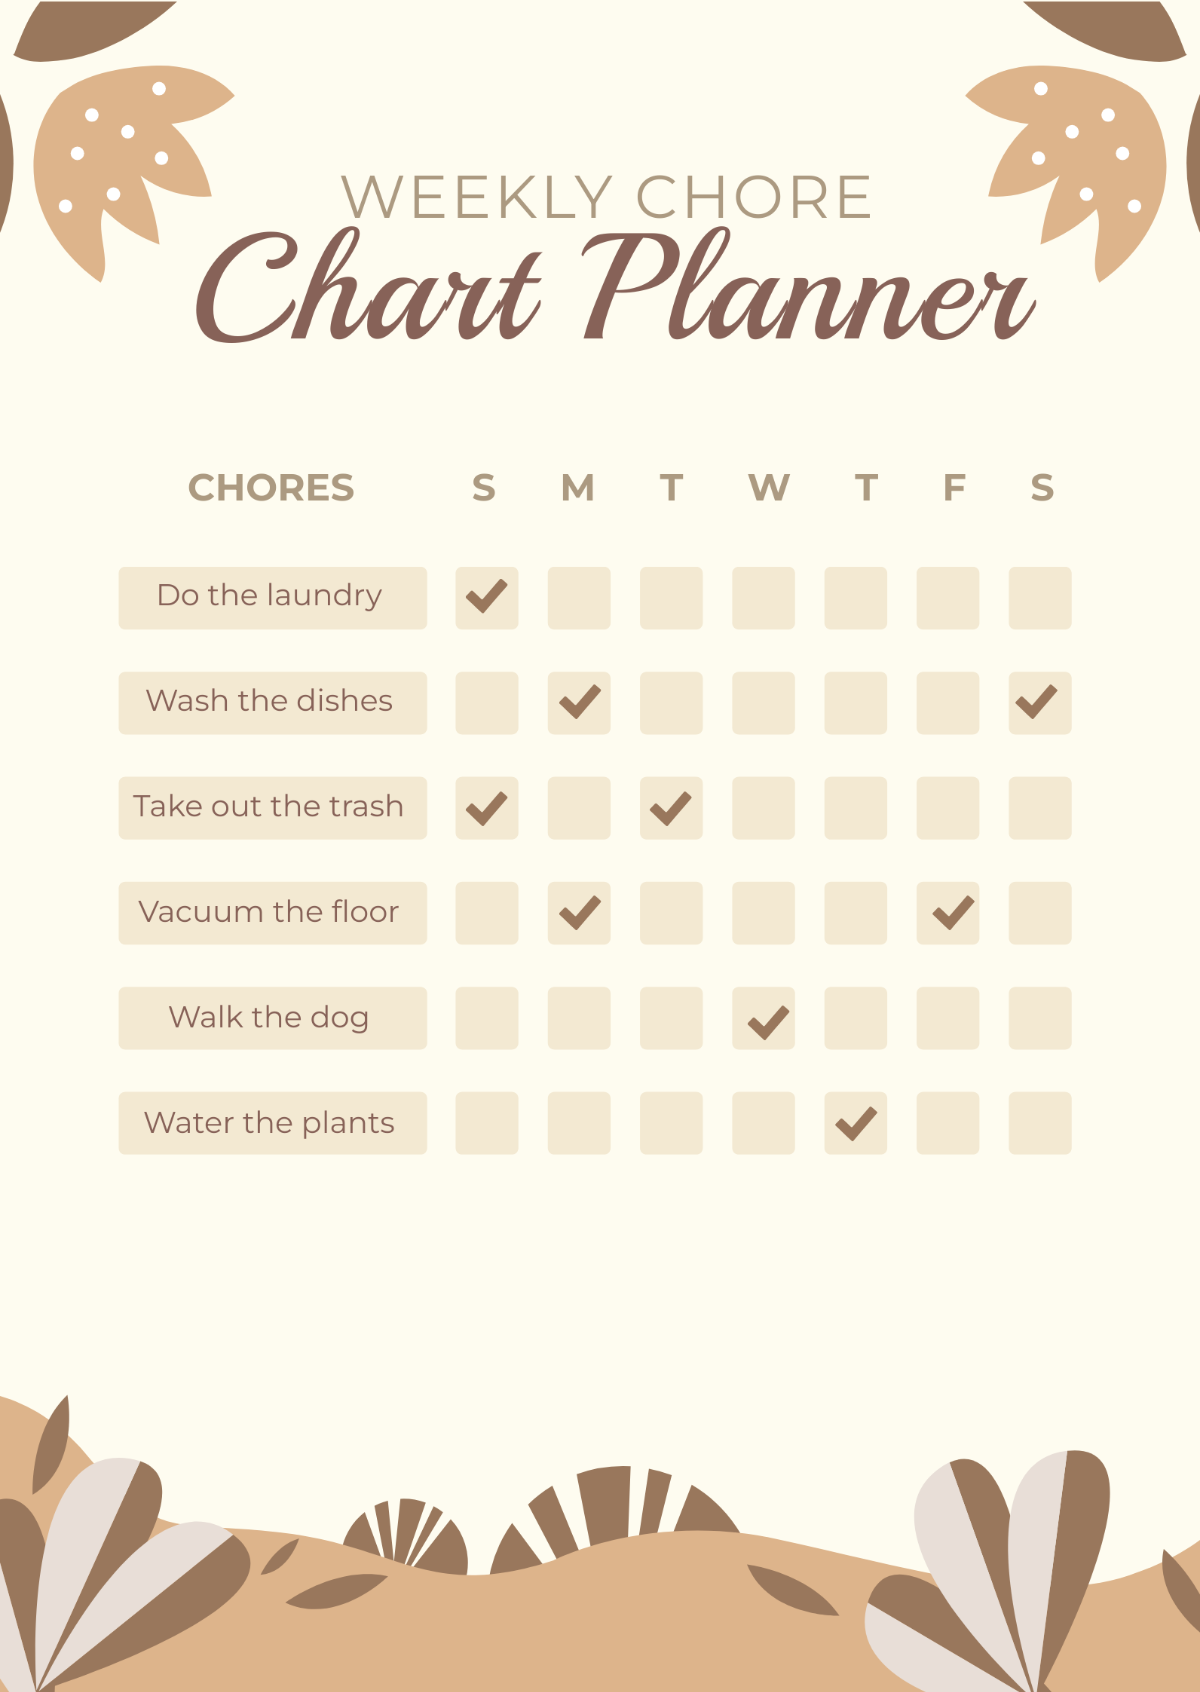 Weekly Chore Chart Planner